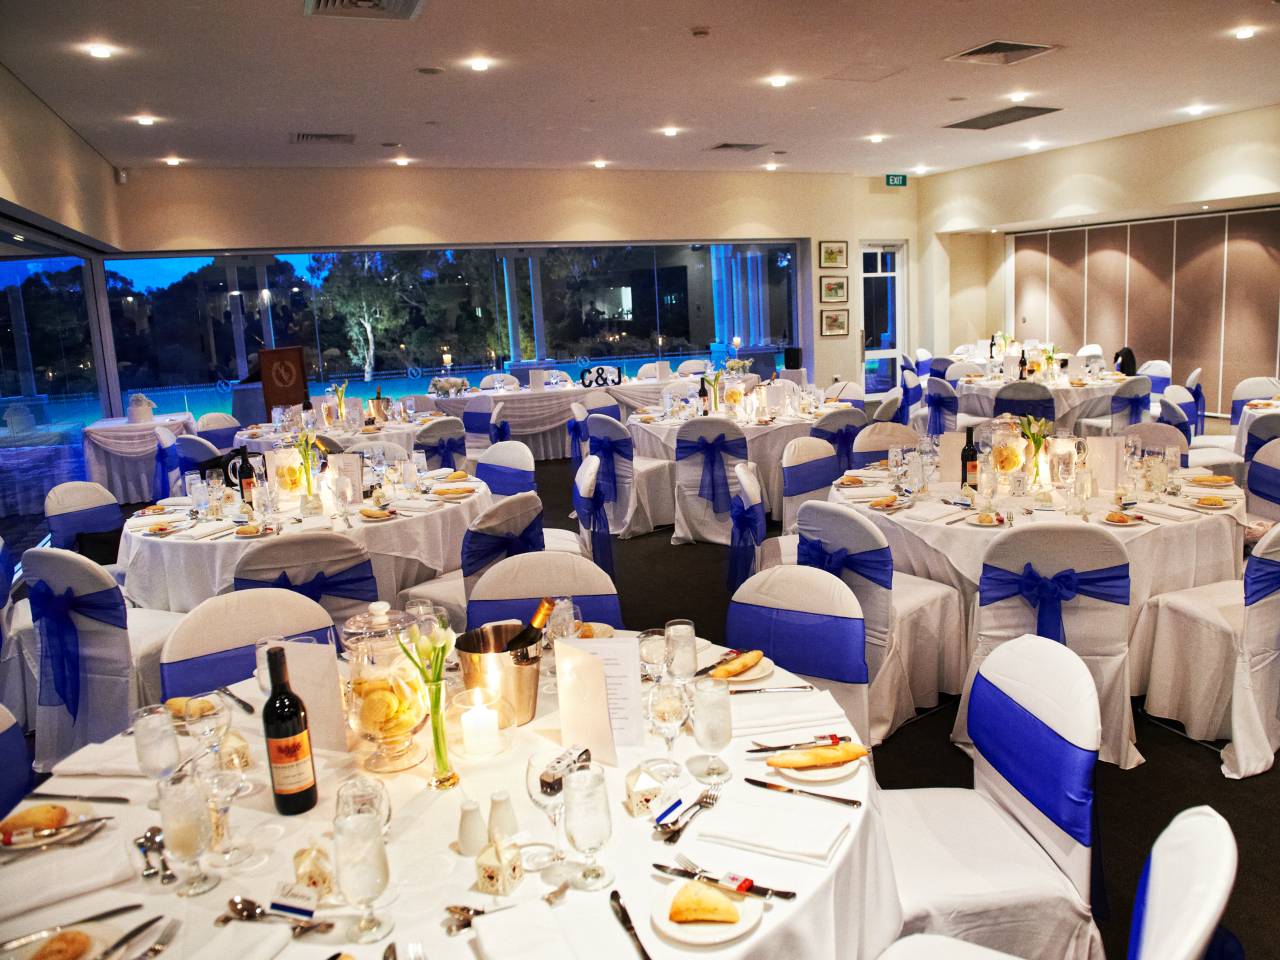 Banquet function room